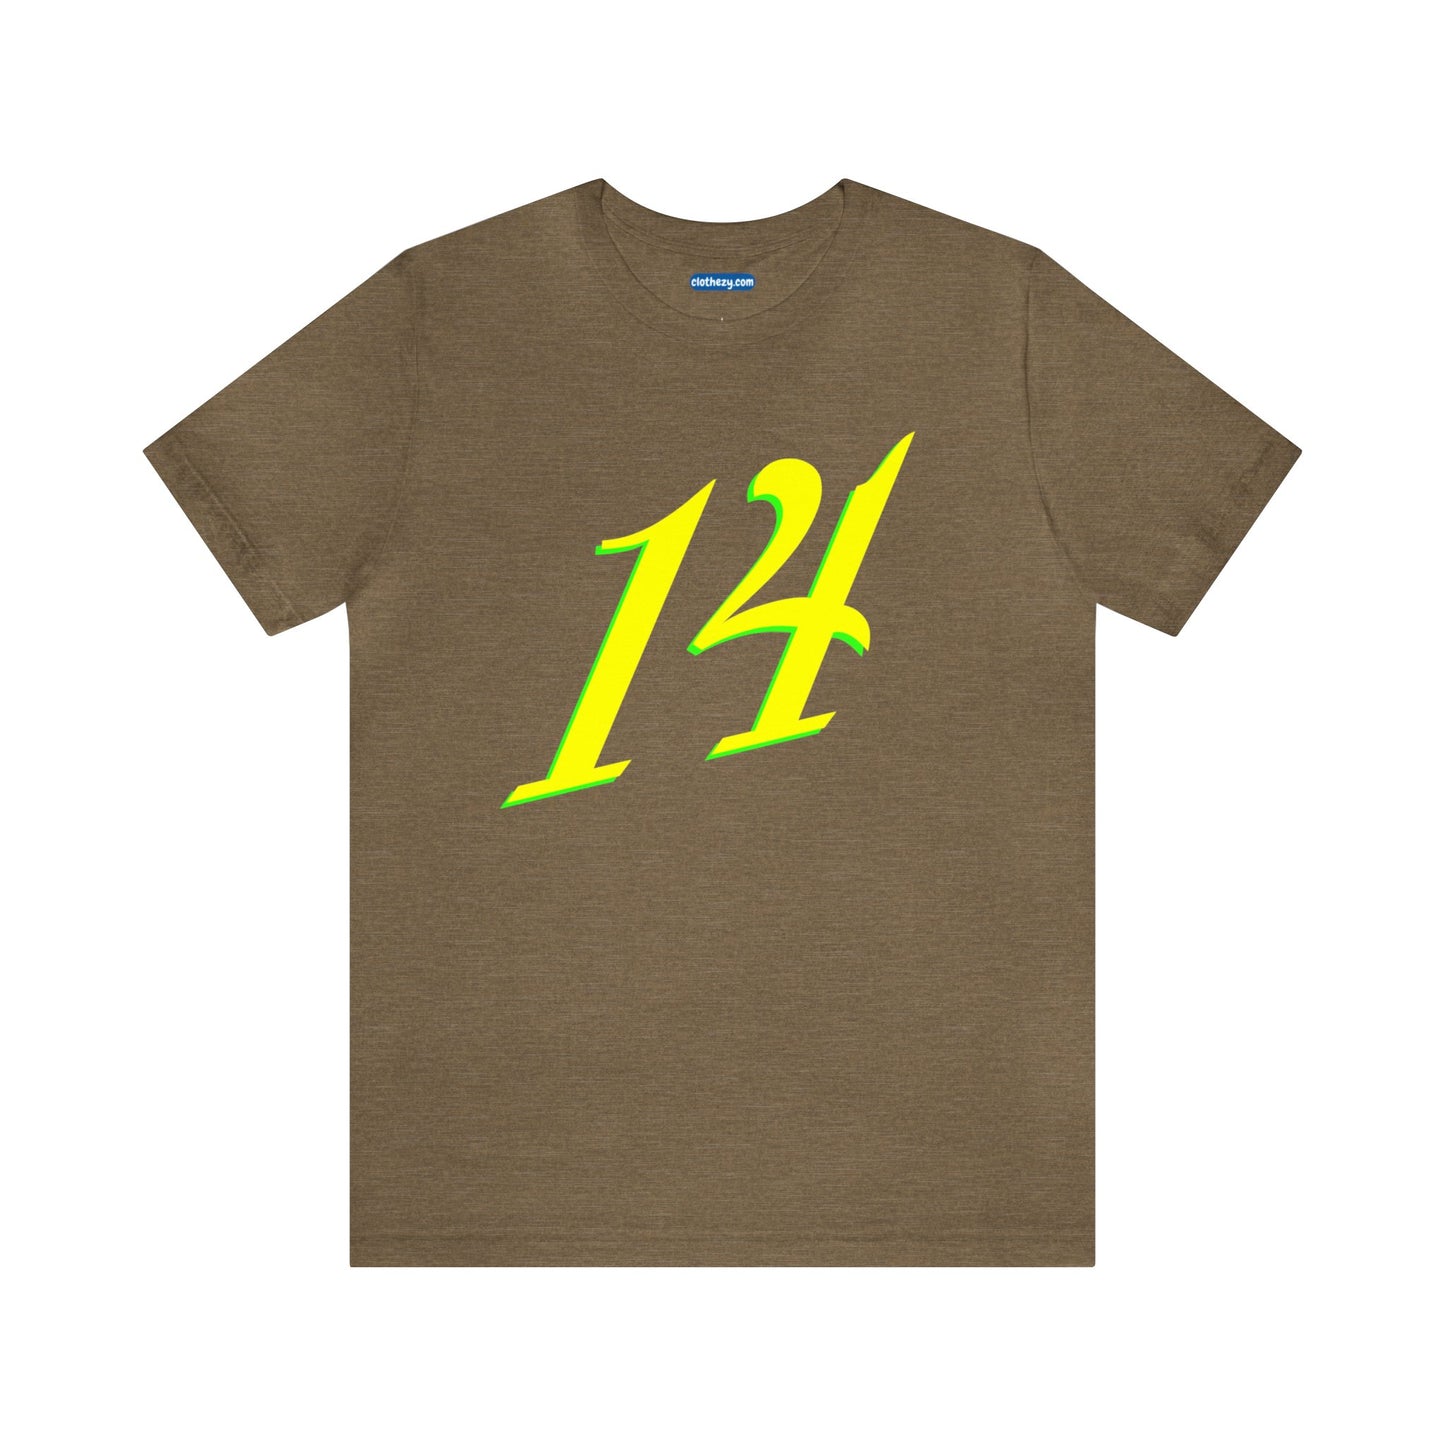 Number 14 Design - Soft Cotton Tee for birthdays and celebrations, Gift for friends and family, Multiple Options by clothezy.com in Olive Heather Size Small - Buy Now